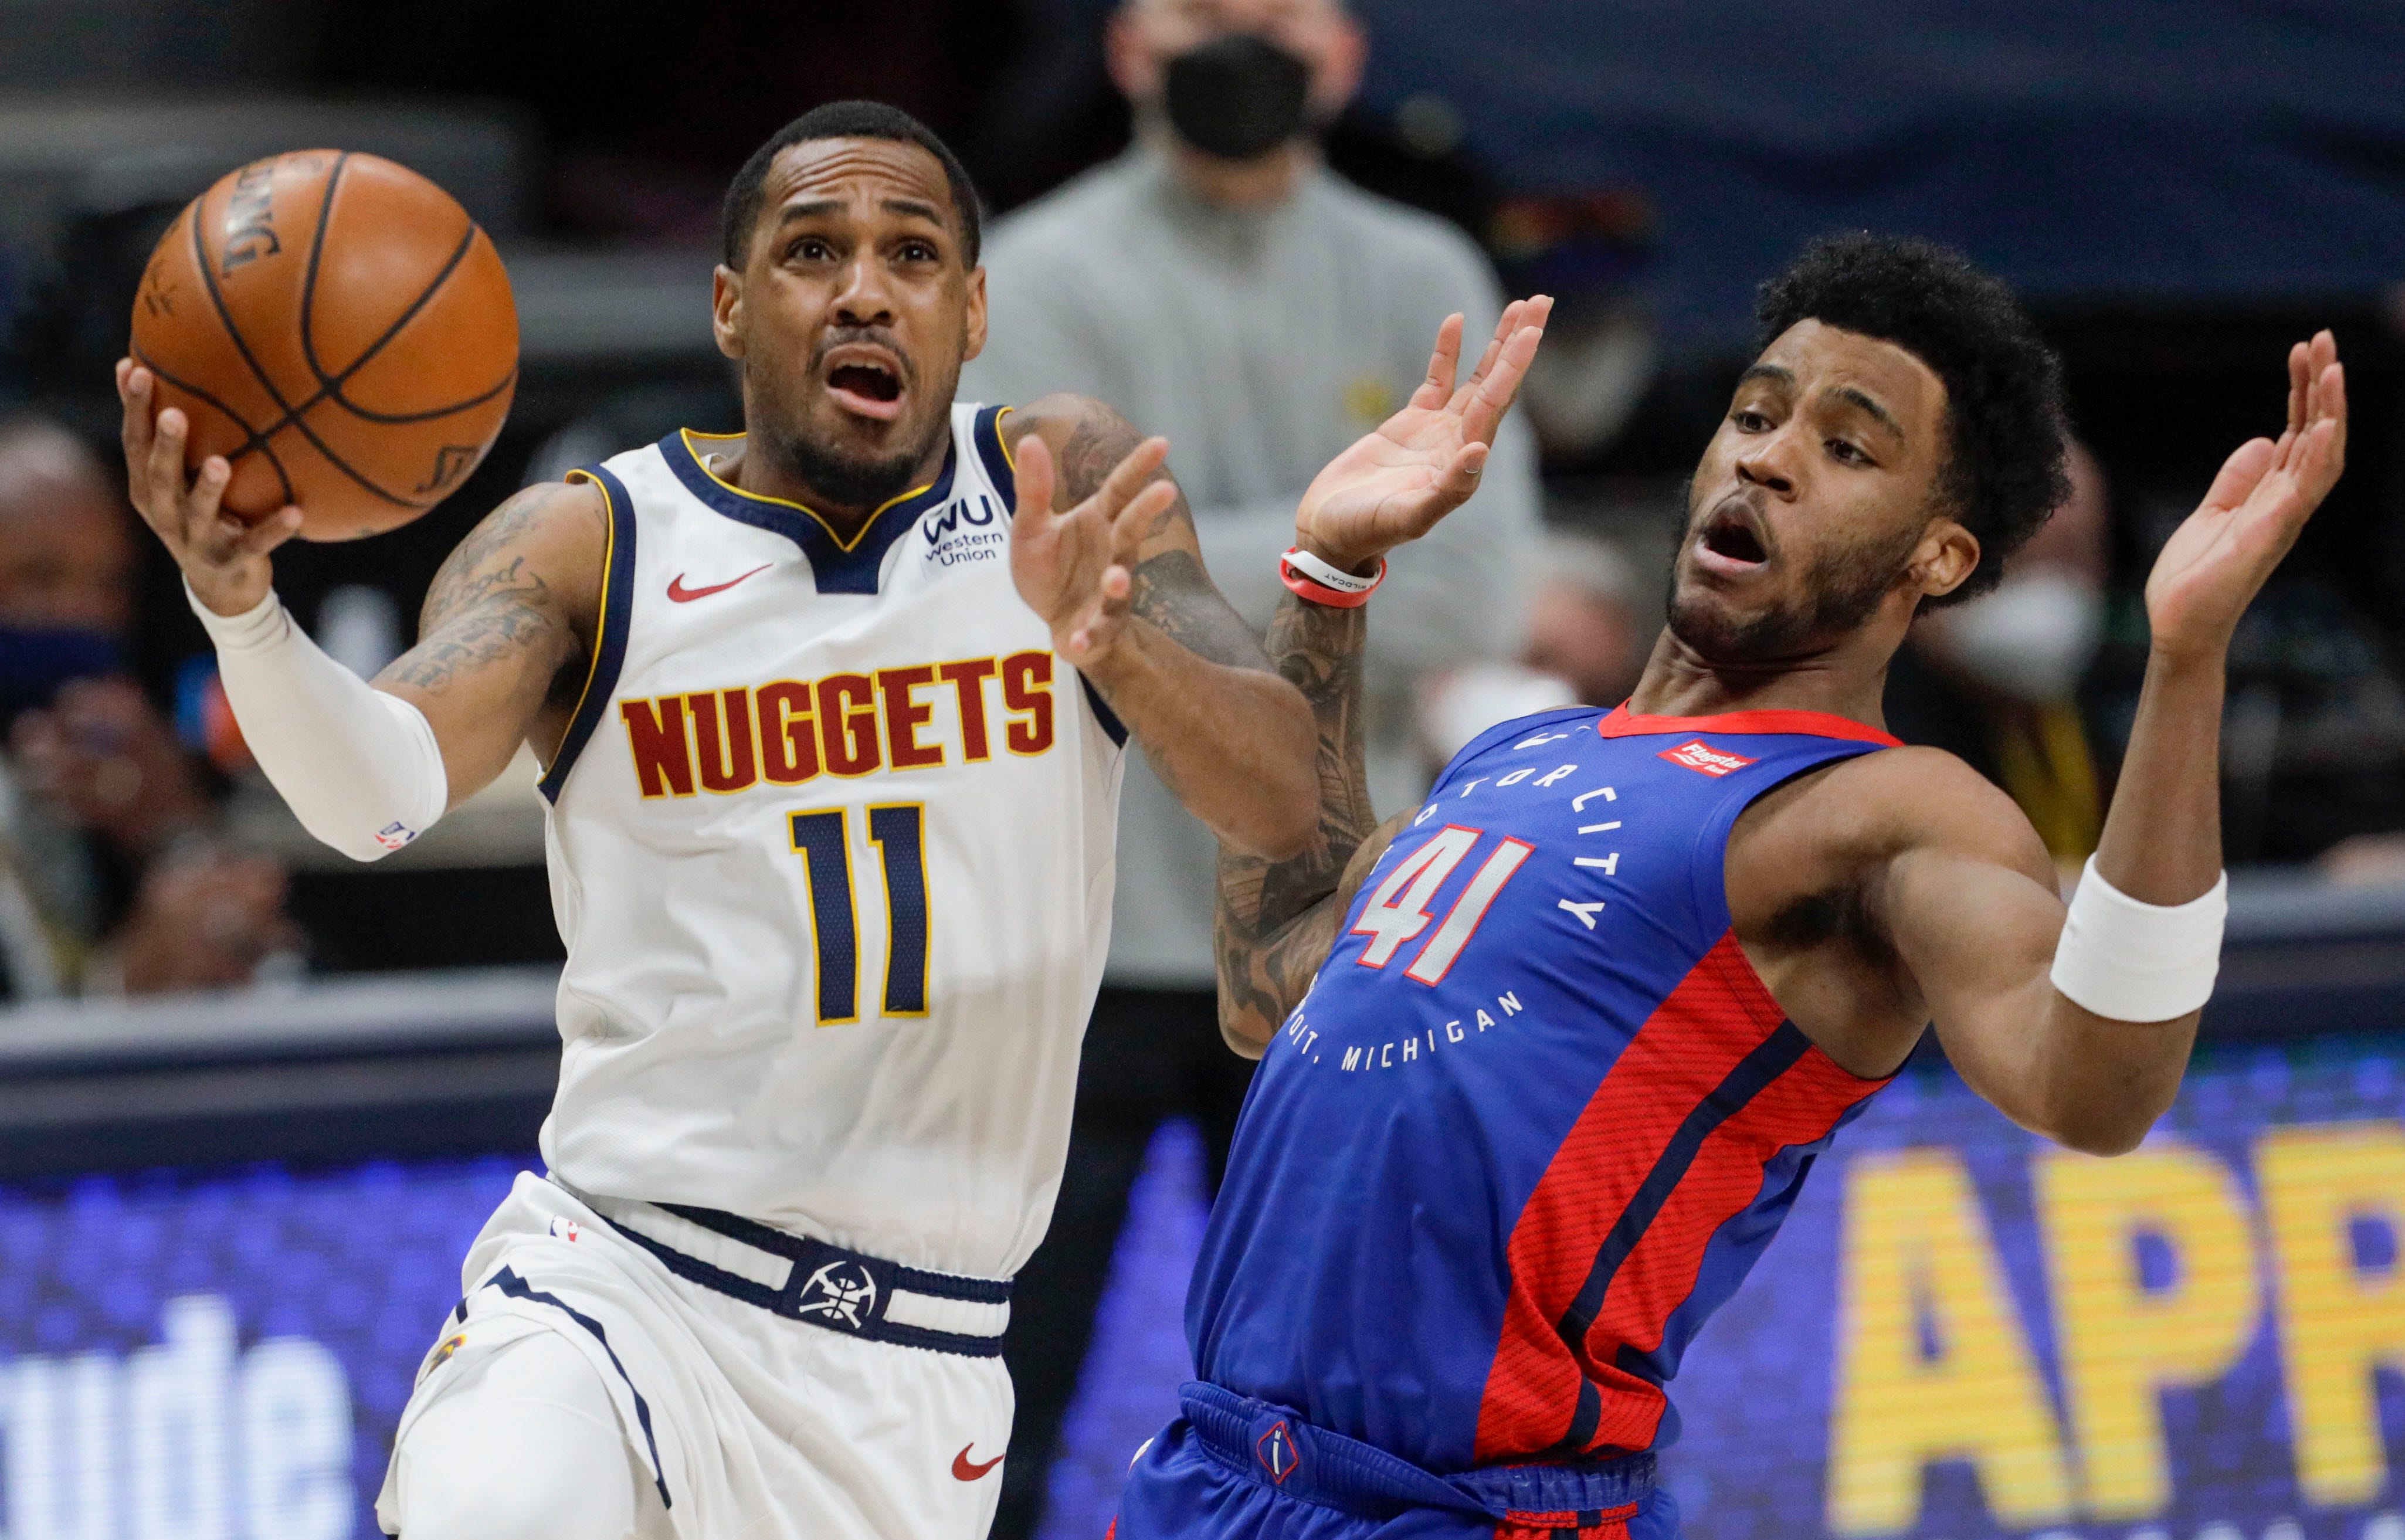 Denver Nuggets guard Monte Morris (11) drives to the basket against Detroit Pistons forward Saddiq Bey (41) in the second quarter of an NBA basketball game in Denver, Tuesday, April 6, 2021.